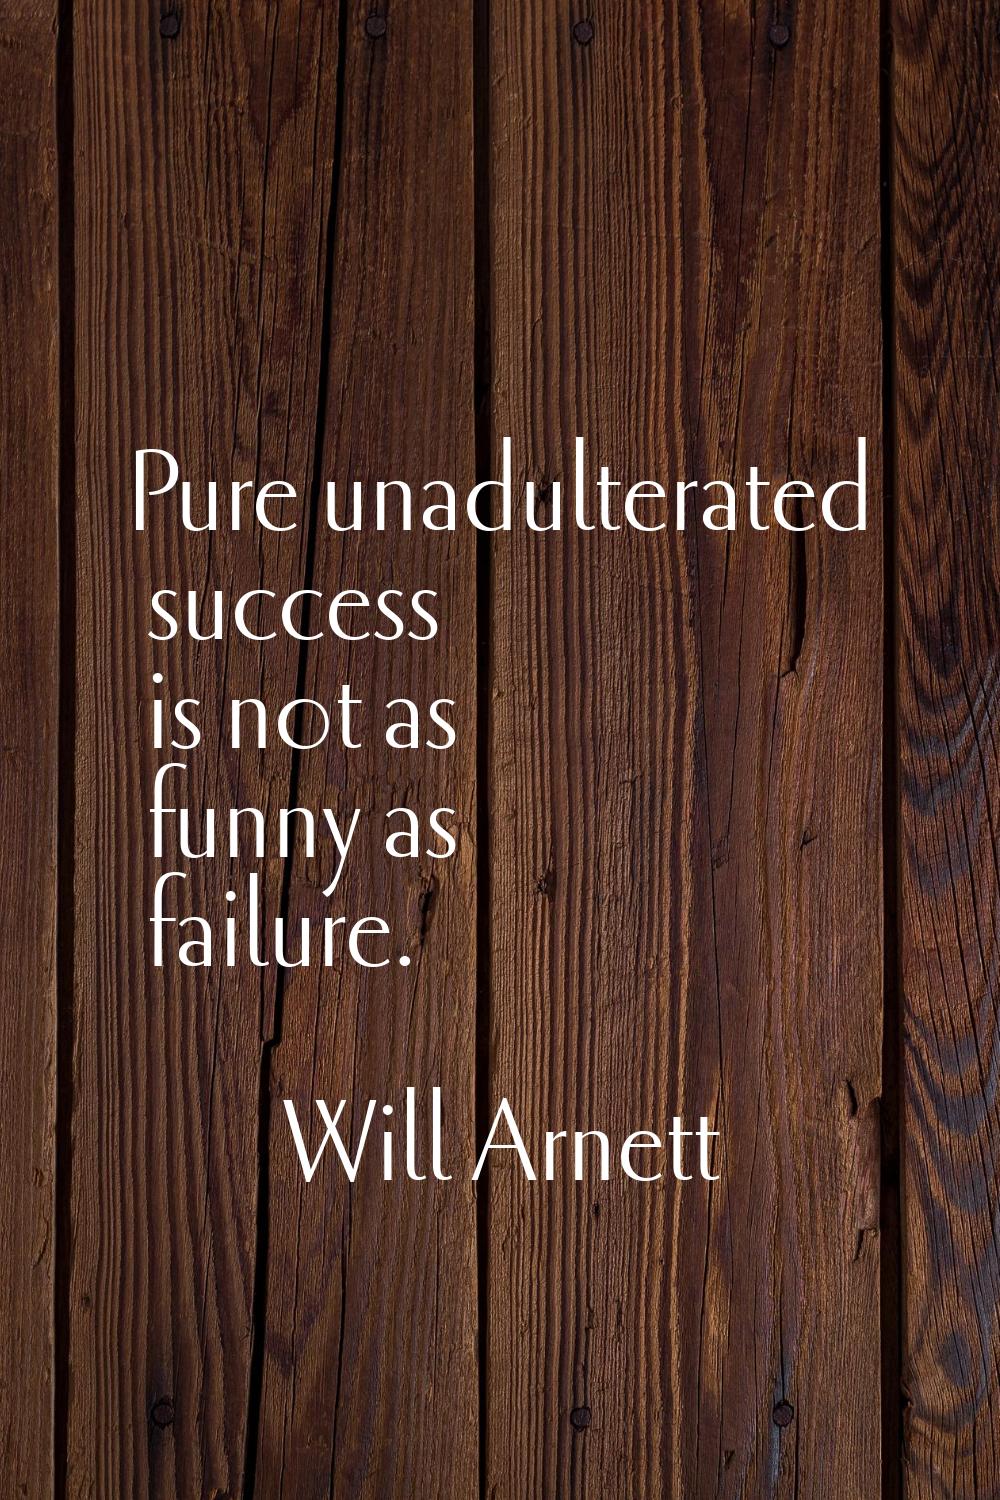 Pure unadulterated success is not as funny as failure.